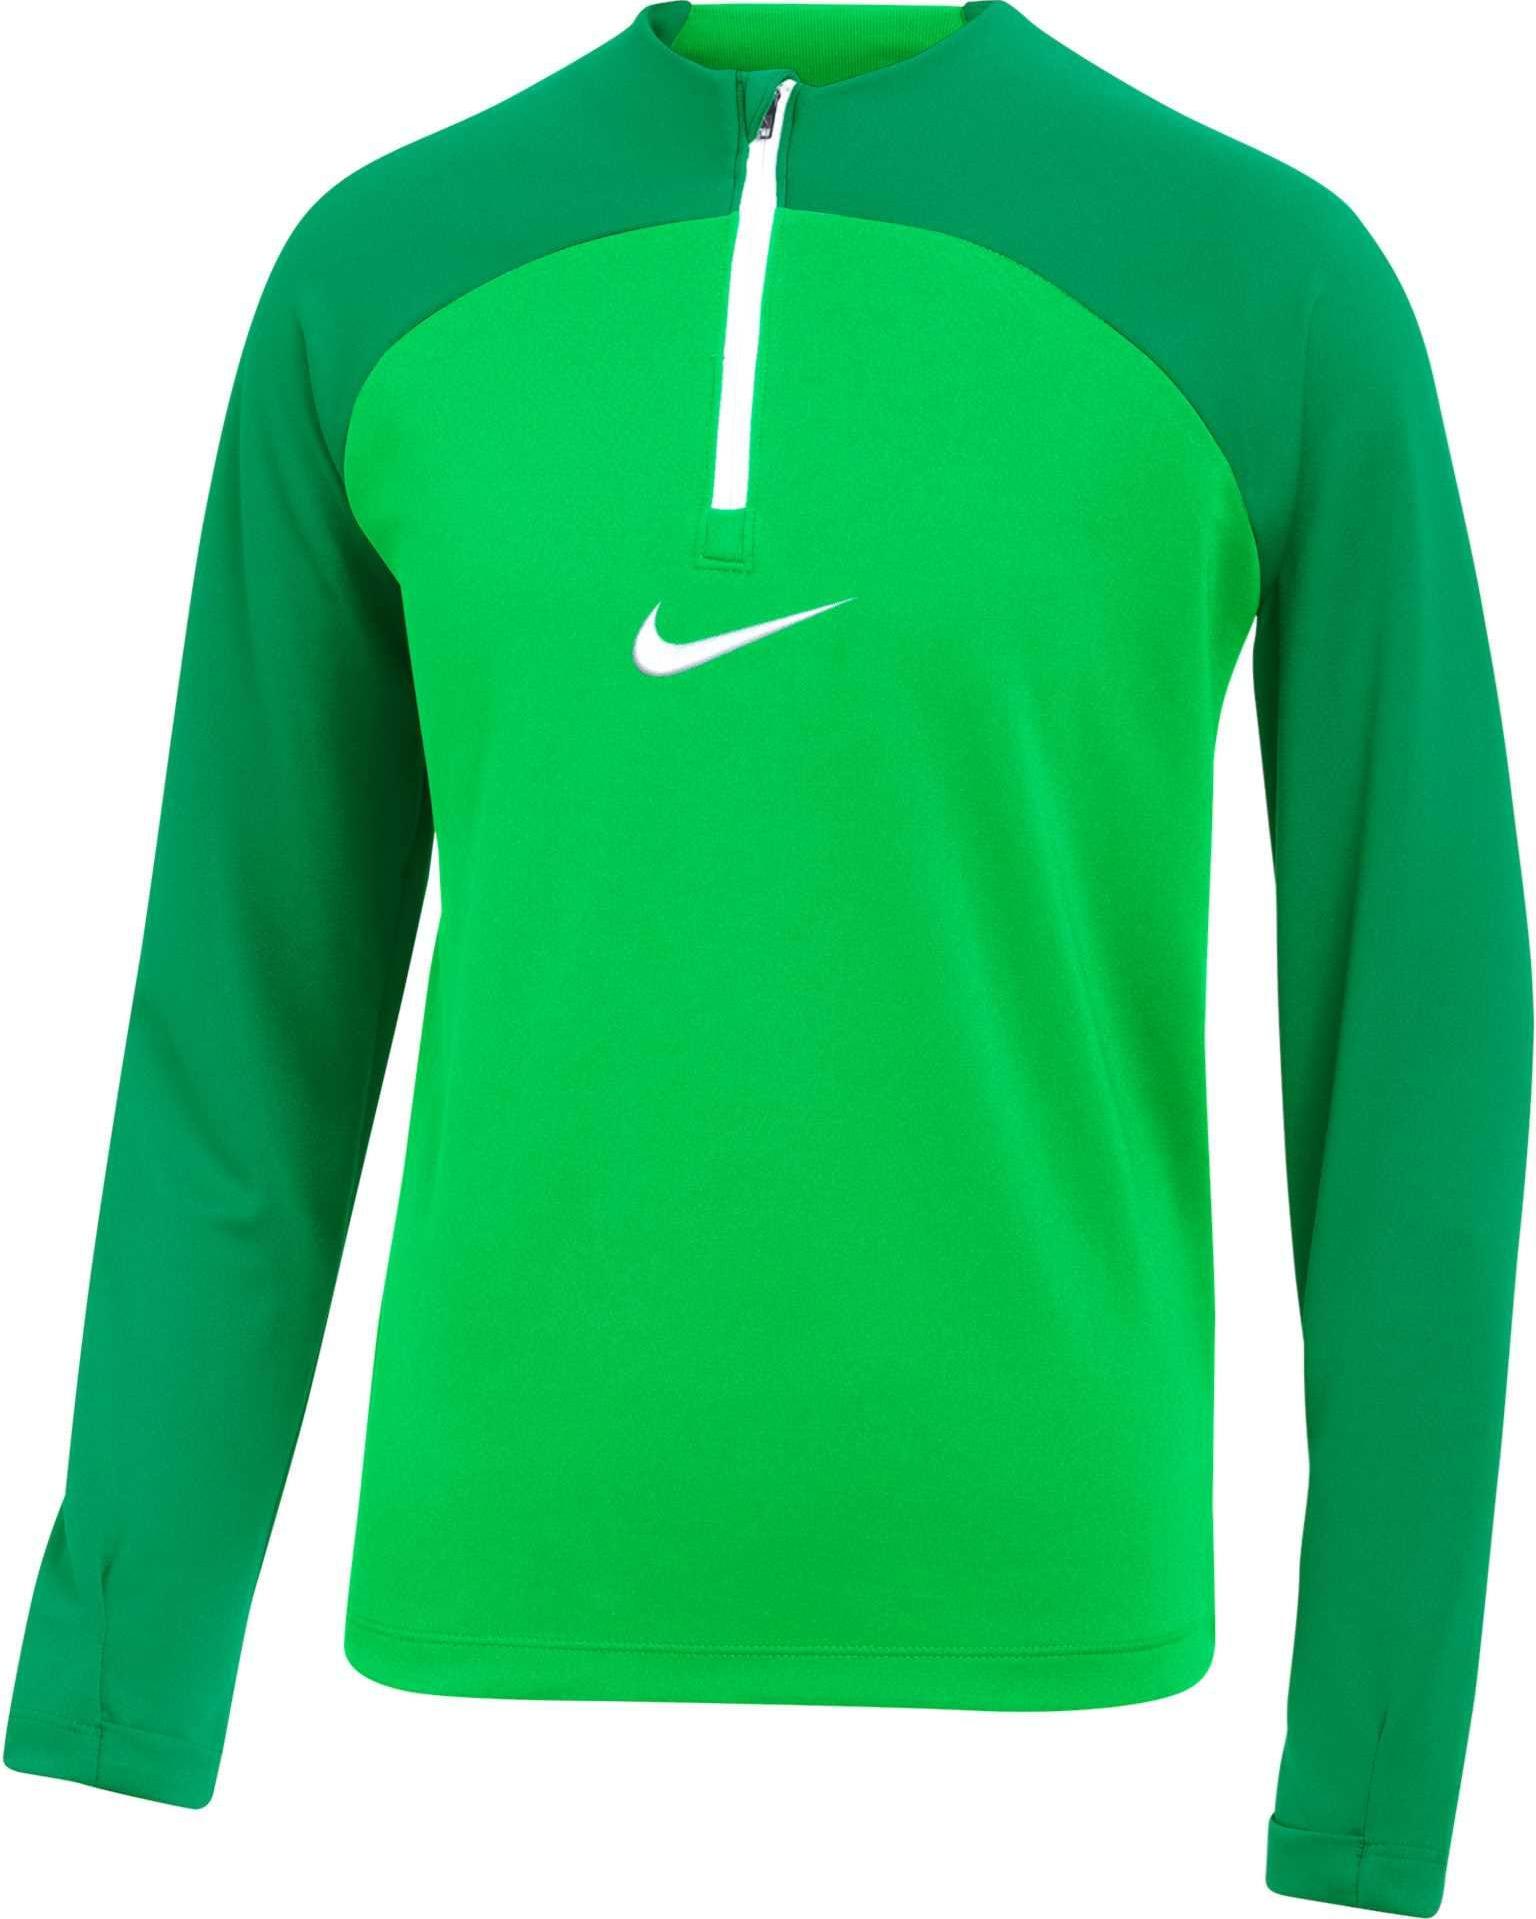 T-Shirt de manga comprida philippines Nike Academy Pro Drill Top Youth